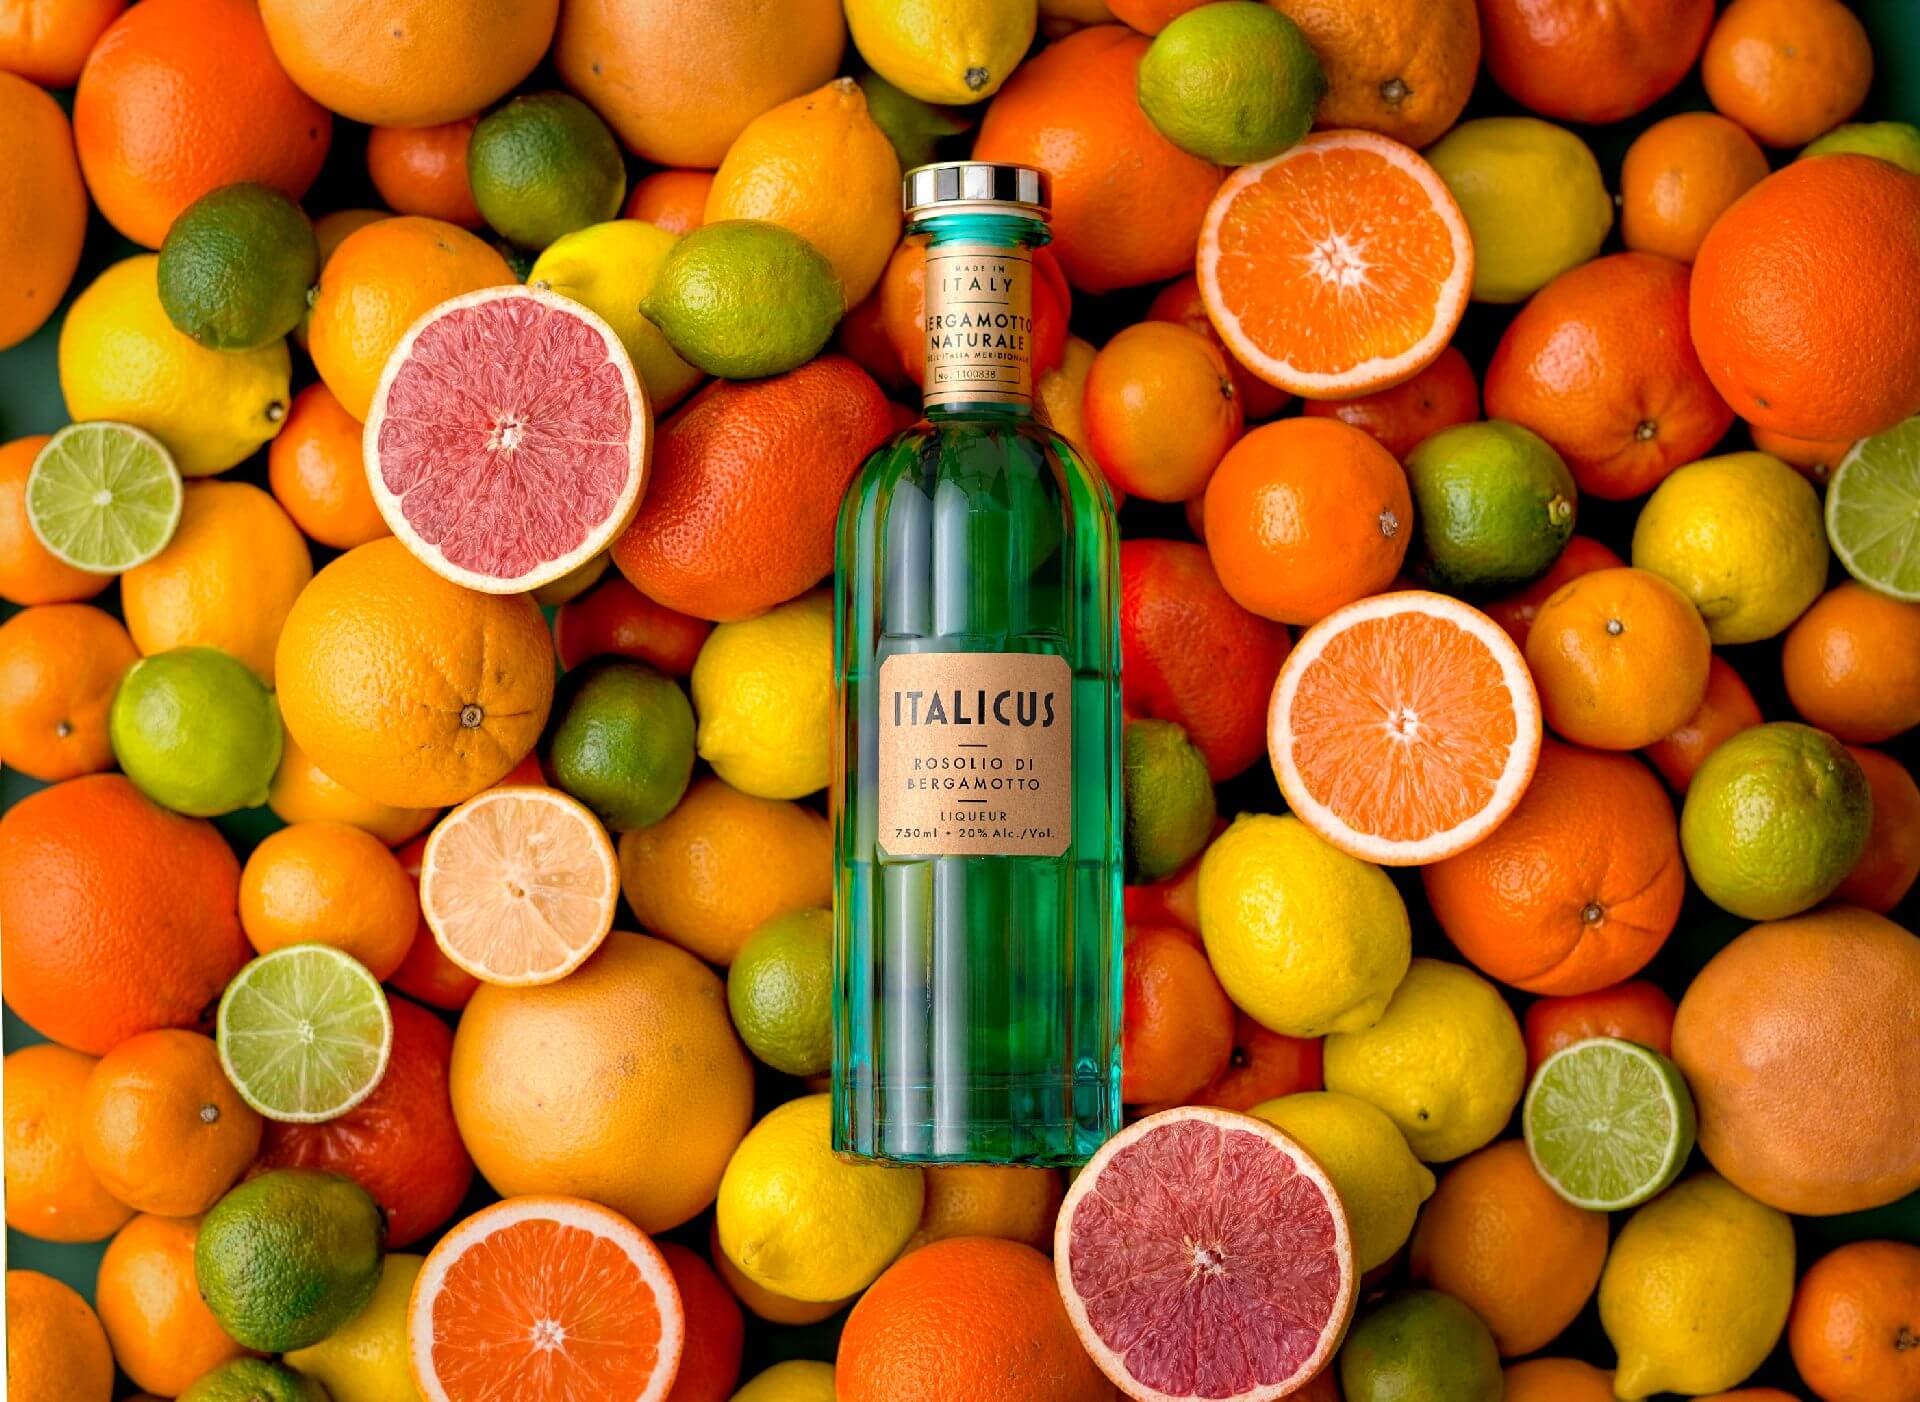 ITALICUS bottle surrounded by citrus fruits